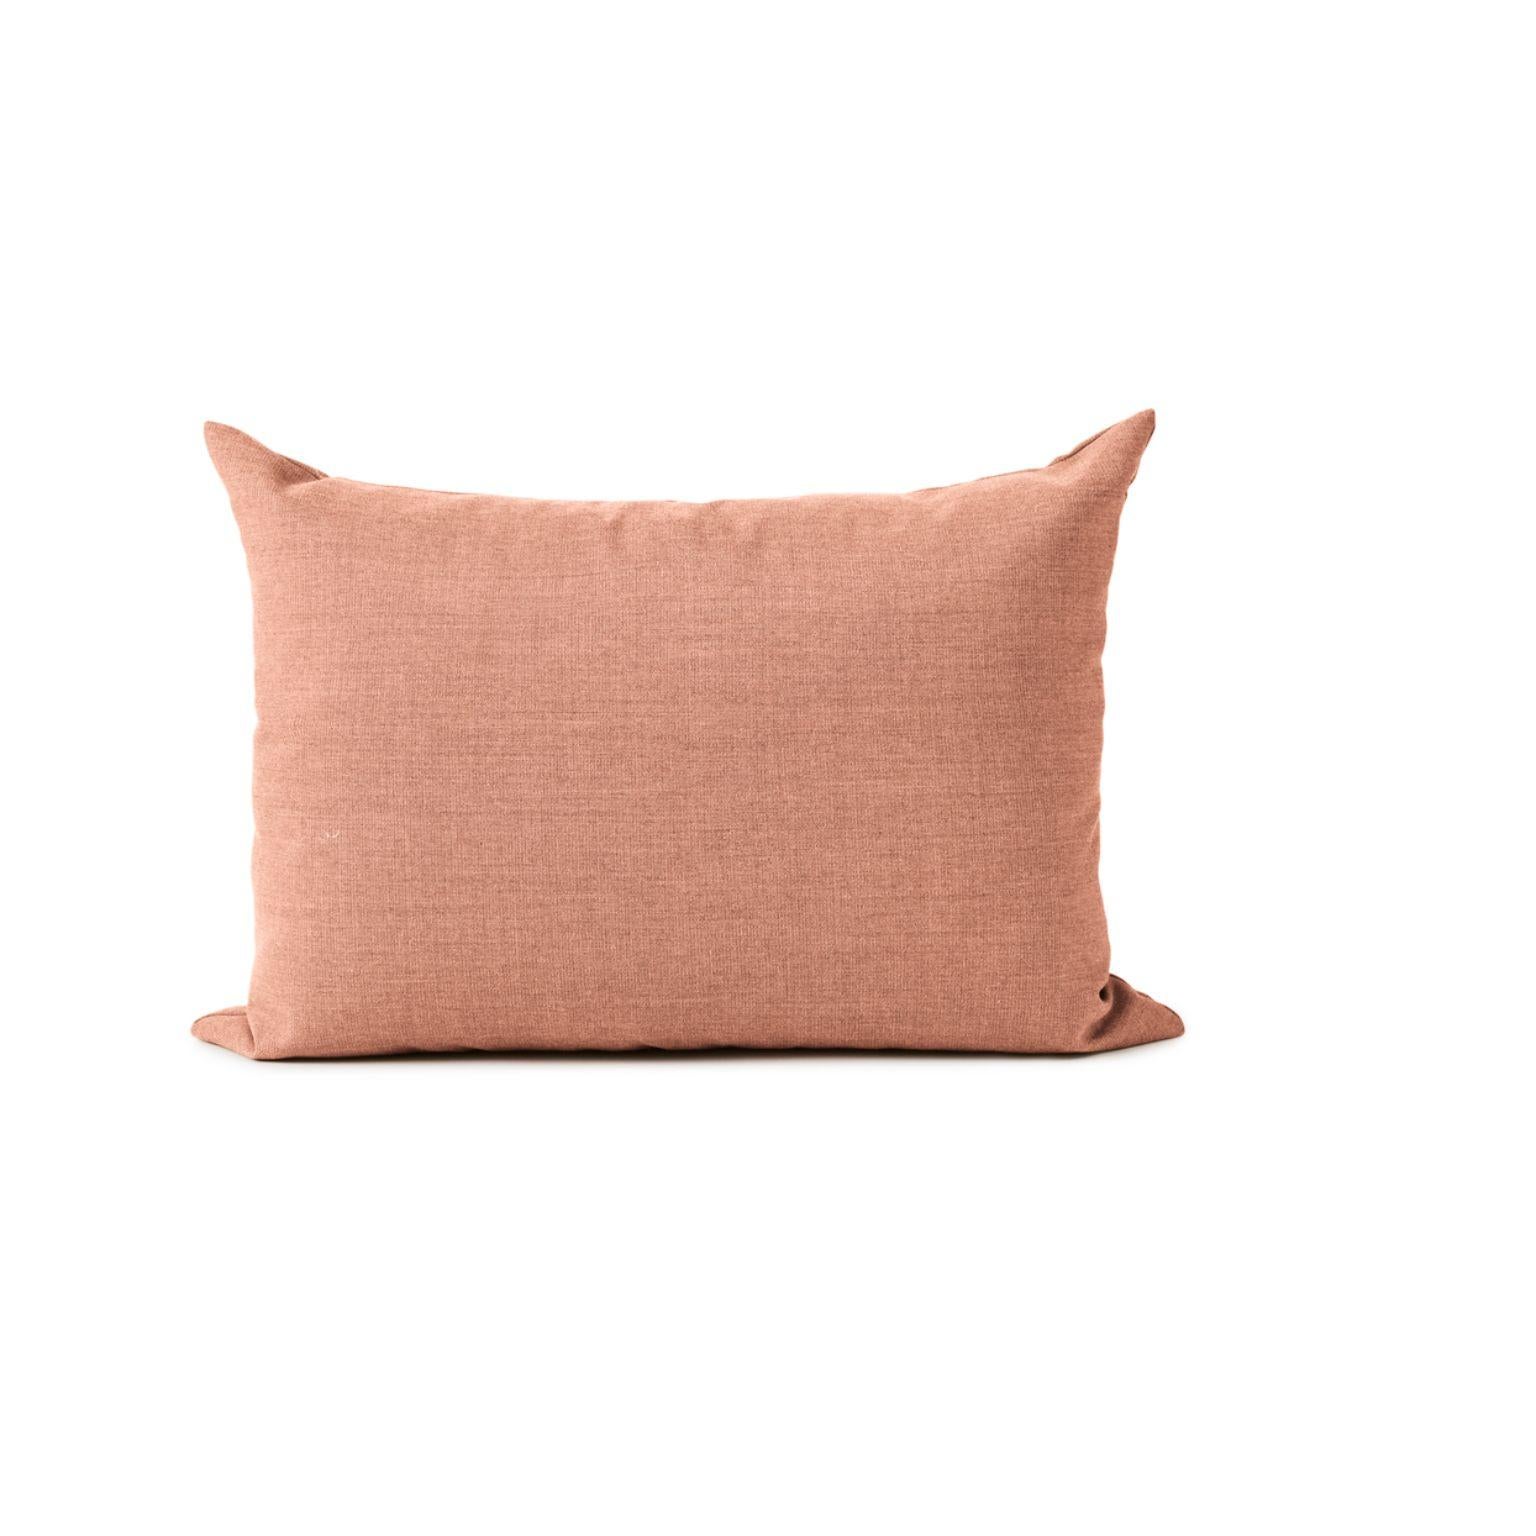 Galore cushion square pale rose by Warm Nordic
Dimensions: D70 x H 50 cm
Material: Textile upholstery, Granulate and feathers filling.
Weight: 1.4 kg
Also available in different colours and finishes. 

An elegant oversized sofa cushion, which